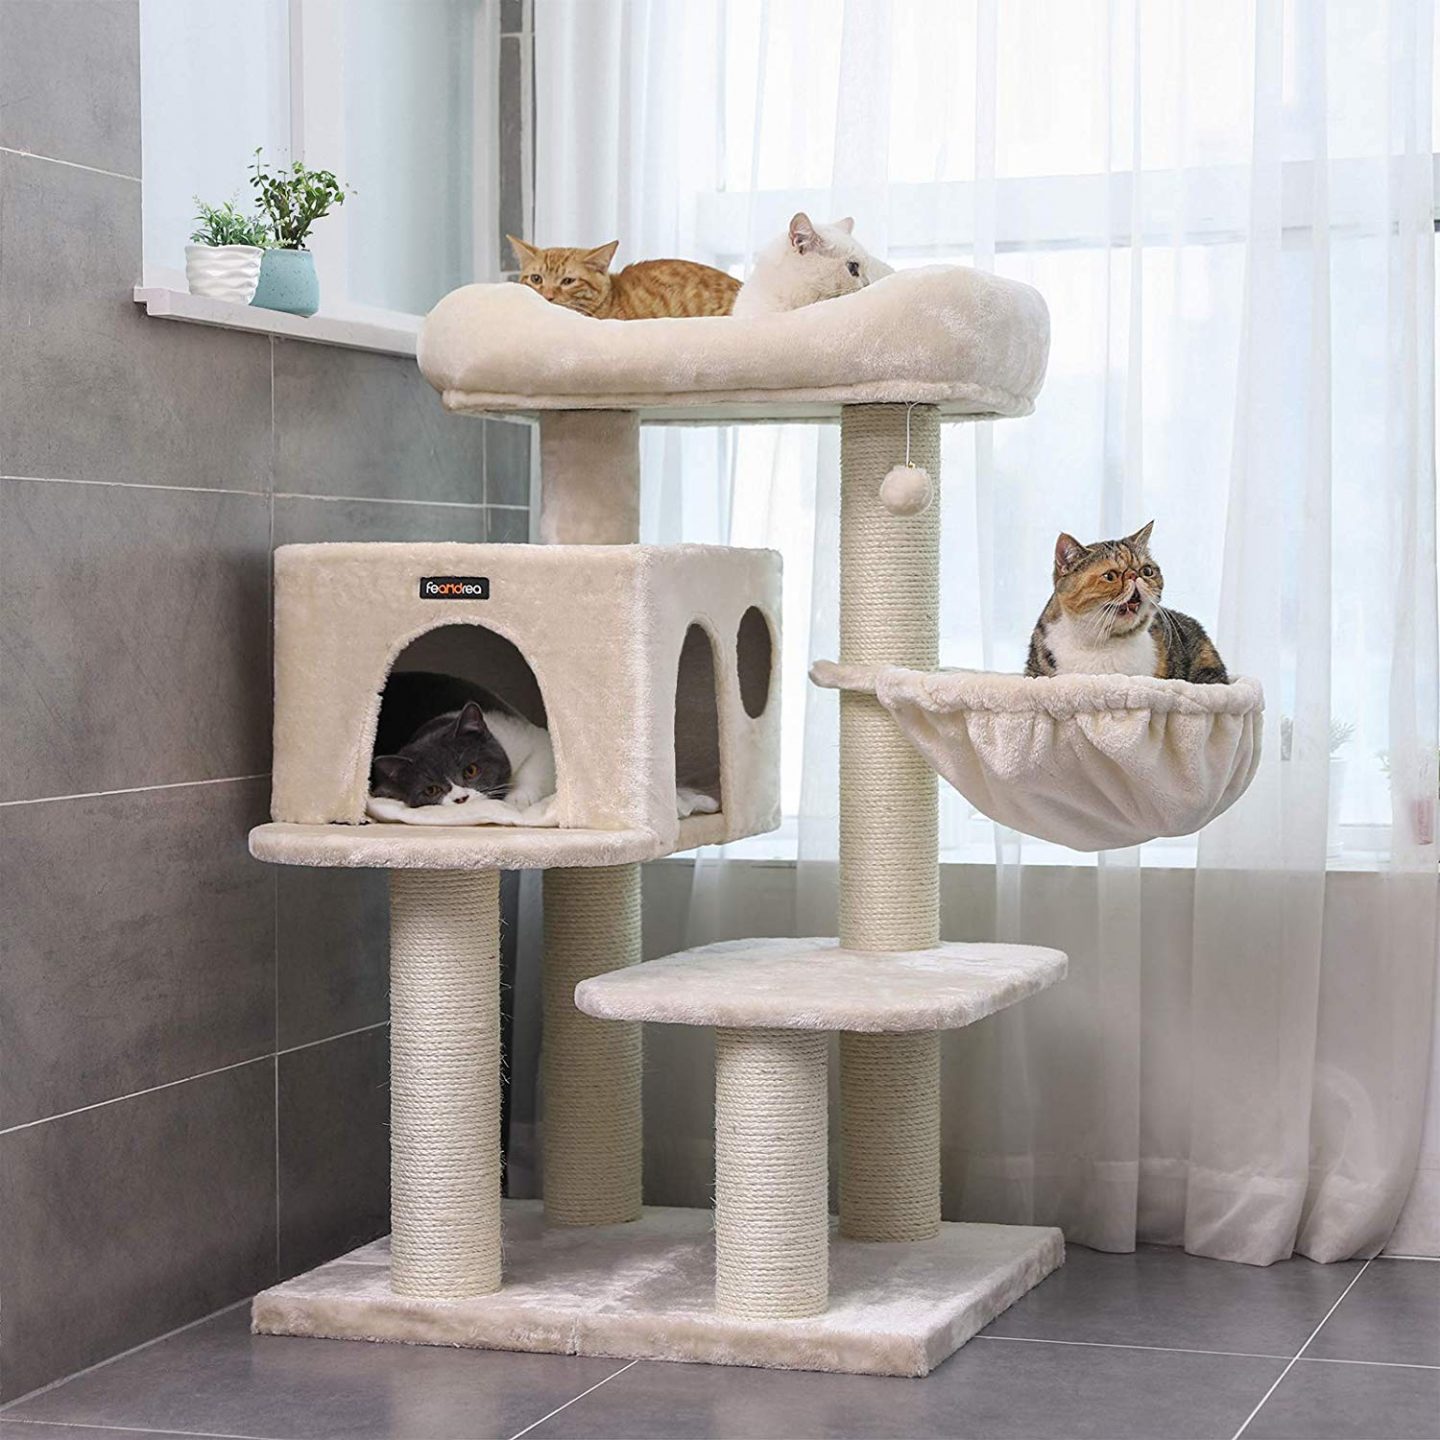 Adjustable cat trees can make it so much easier to get a carpeted cat tree that works well in your space with your decor.